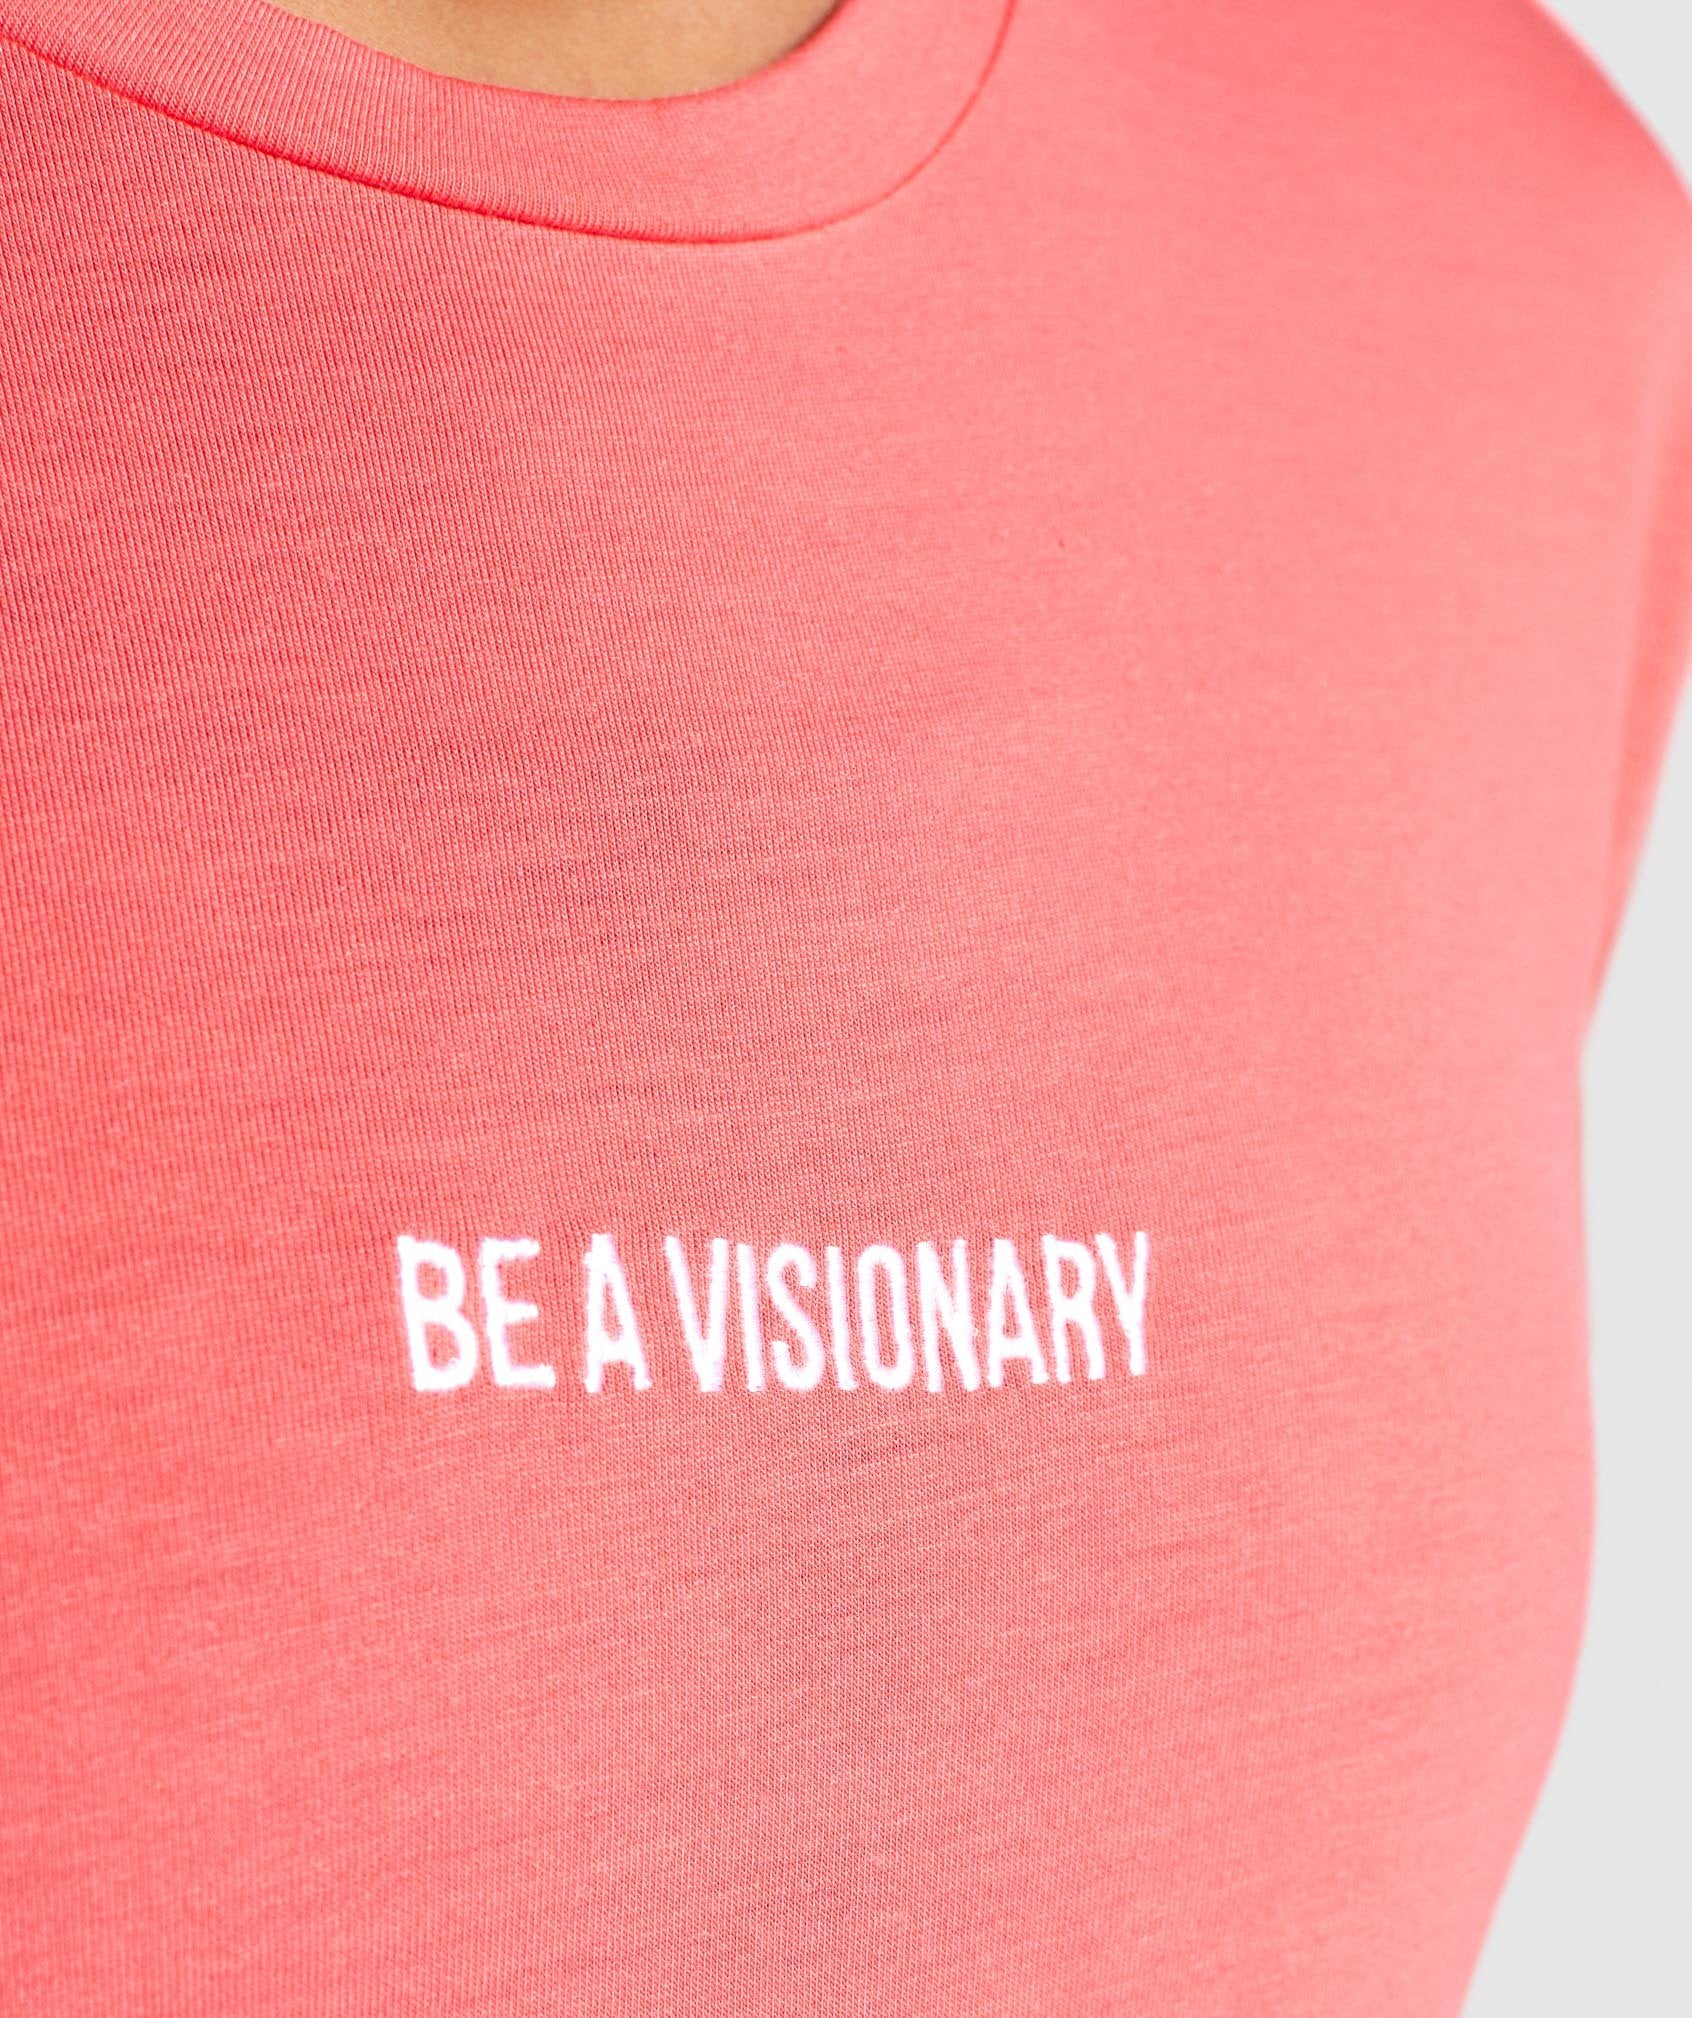 Essential Be a Visionary Tee in Coral - view 6